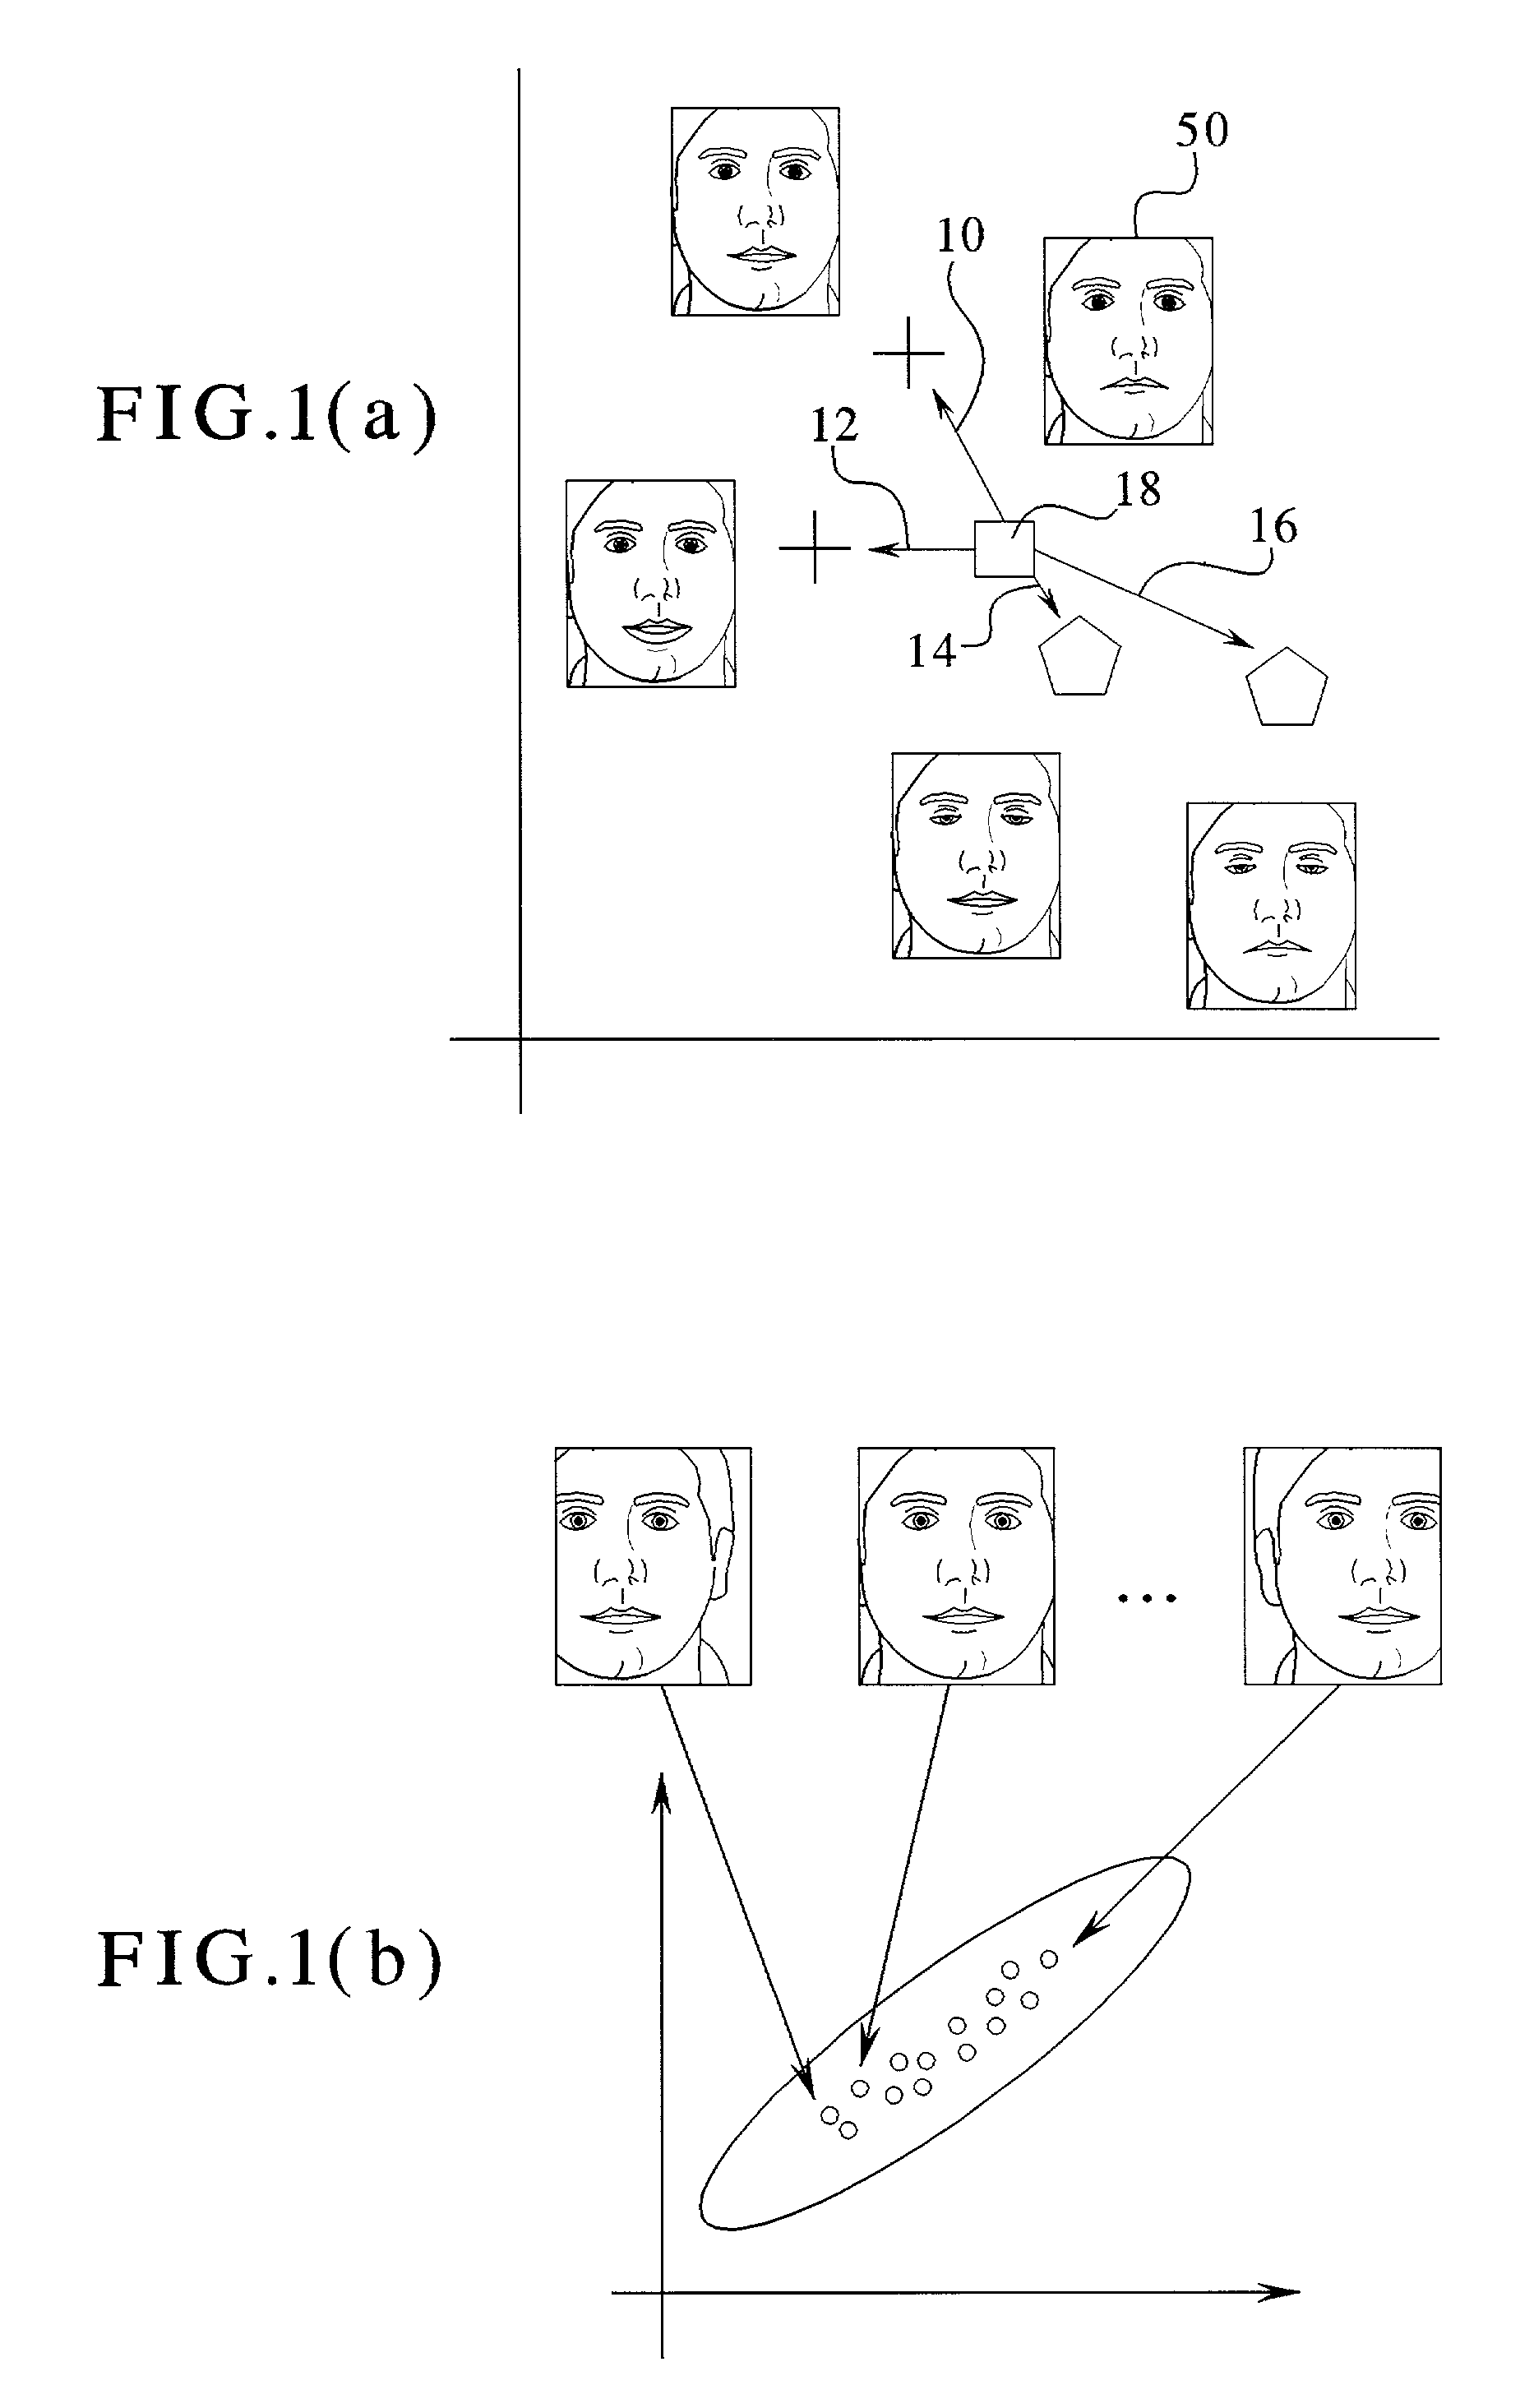 Method of recognizing partially occluded and/or imprecisely localized faces